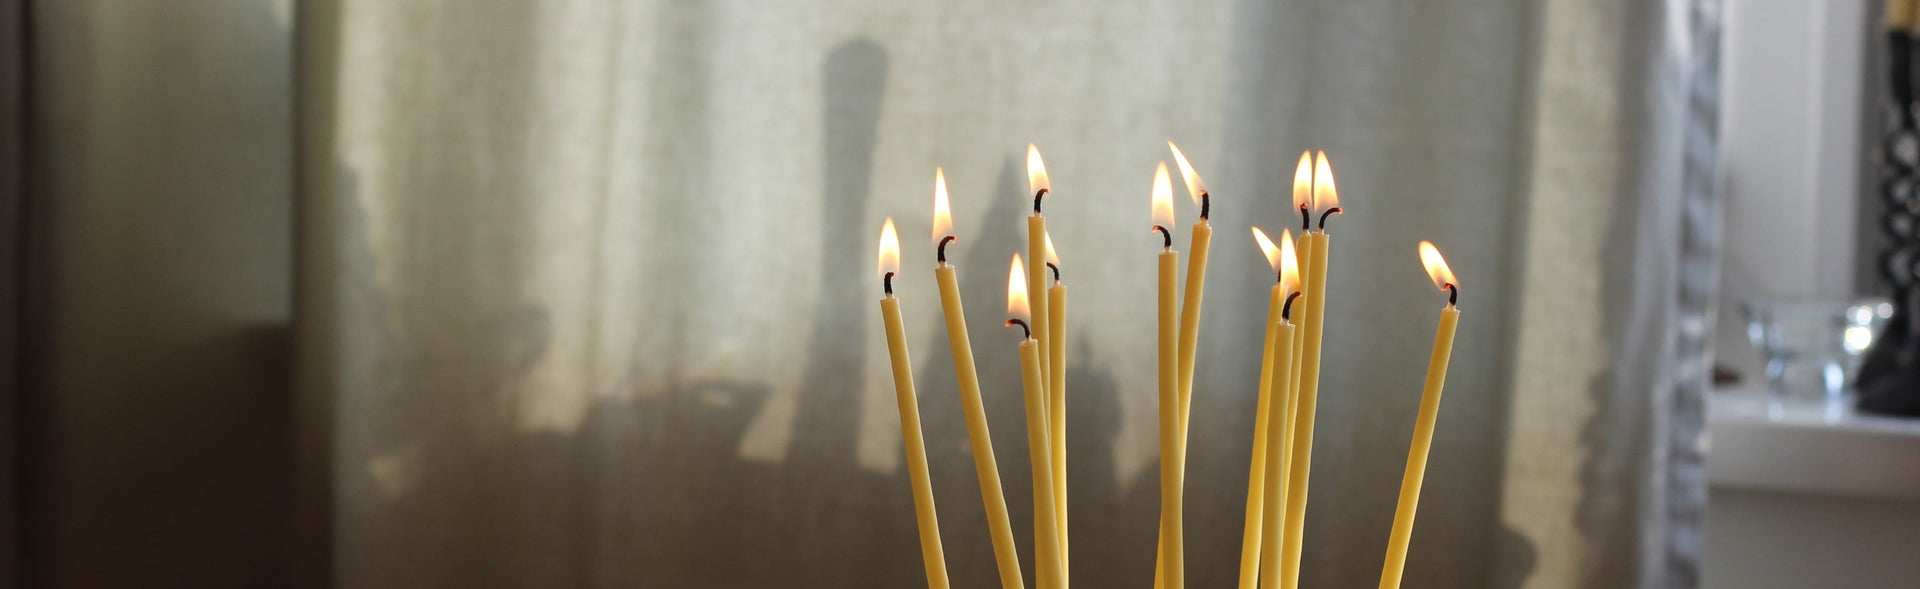 How to Make Hand Dipped Beeswax Candles: Candle Dipping Basics - the Making  Life